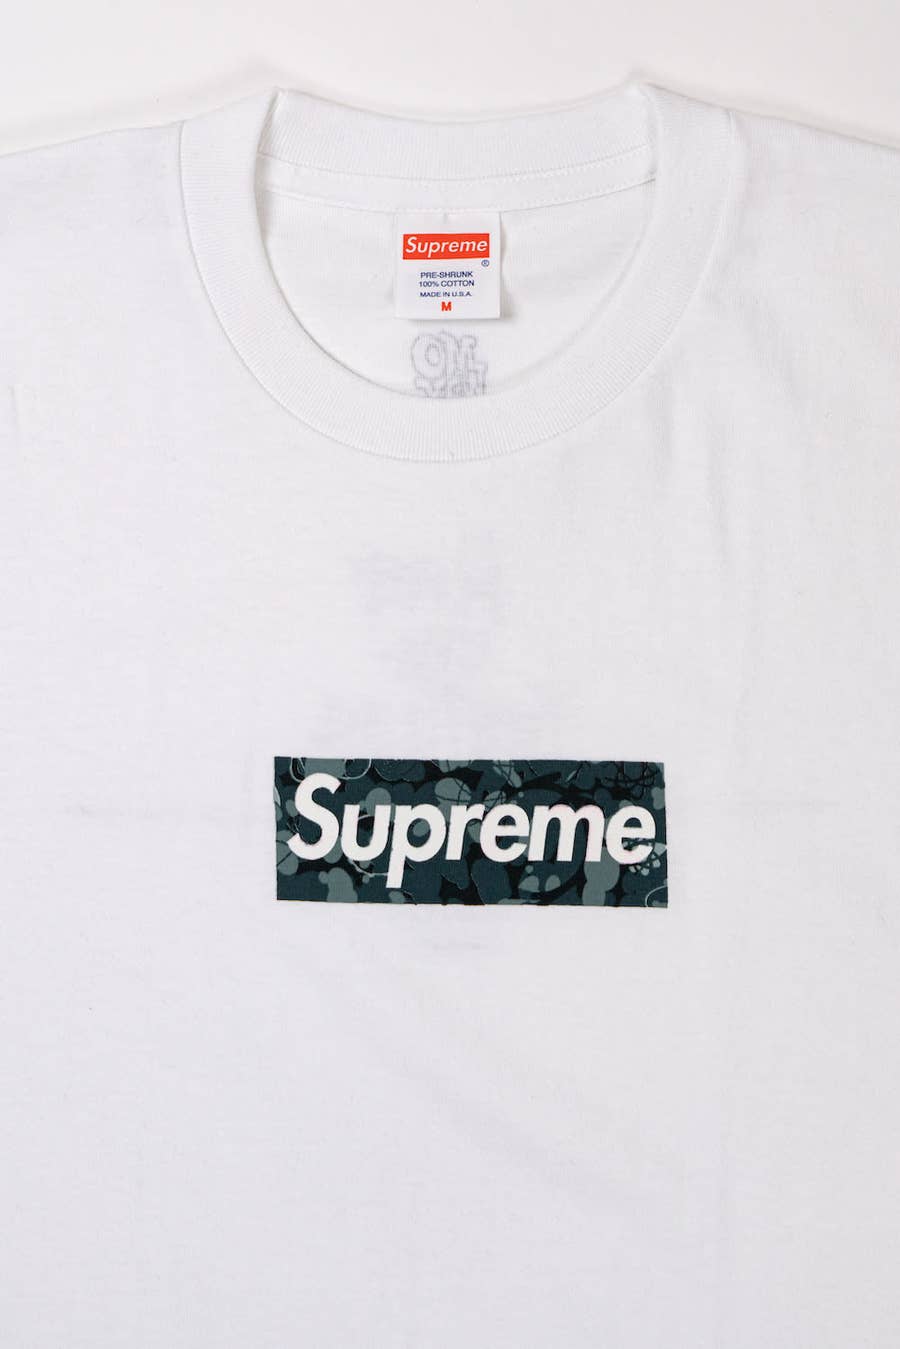 SUPREME FOR SALE: RARE SUPREME BOX LOGO T-SHIRTS FROM 1997 TO 2020